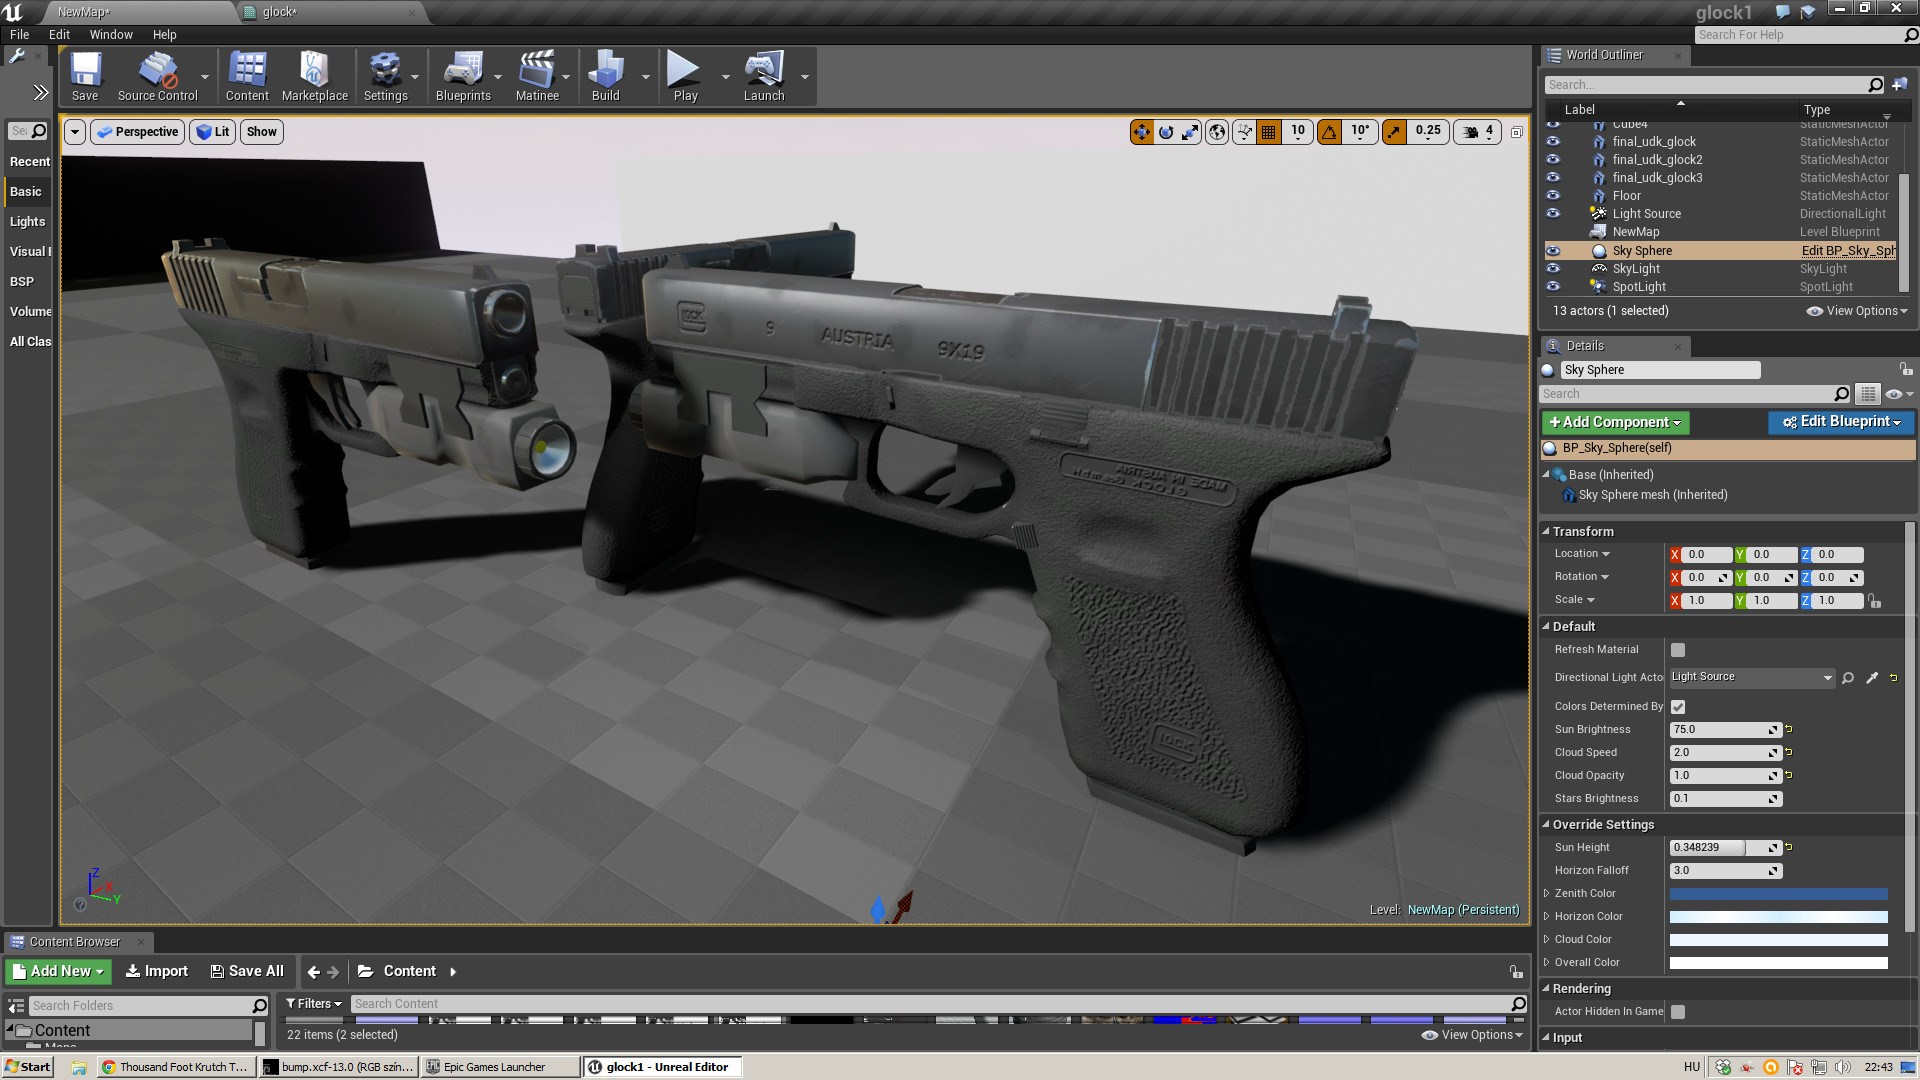 1920x1080 ... Glock 19 in UE4. unfinished by Sipi1989